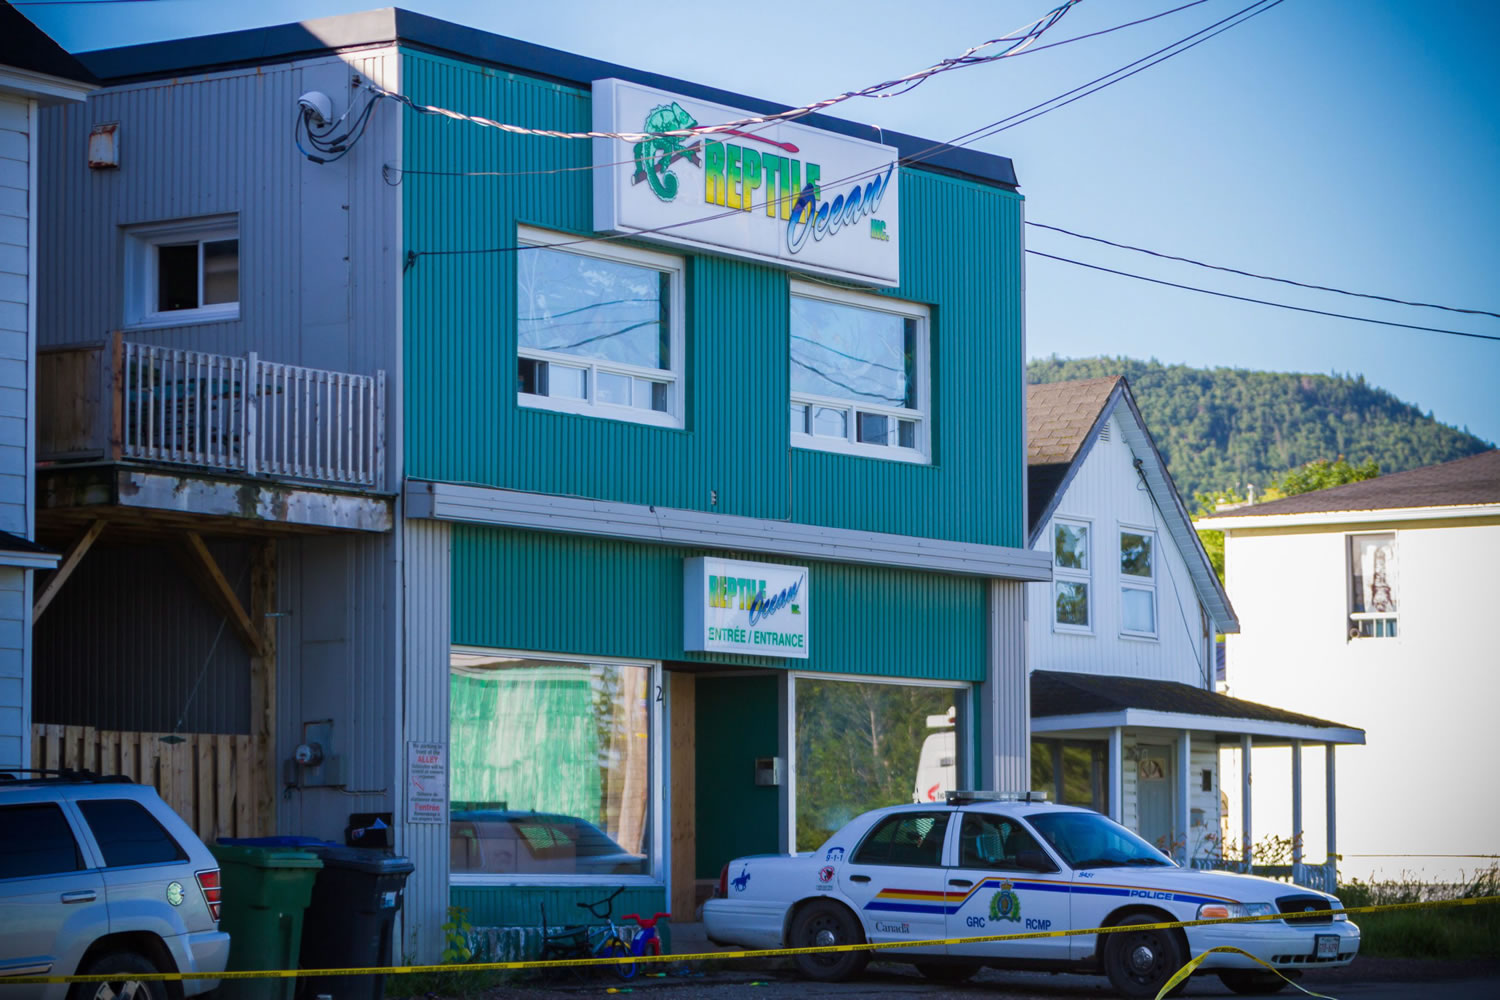 A Royal Canadian Mounted Police cruiser sits outside the Reptile Ocean exotic pet store Tuesday in Campbellton, New Brunswick, Canada, where two boys visiting the apartment above the store were killed by an African rock python.